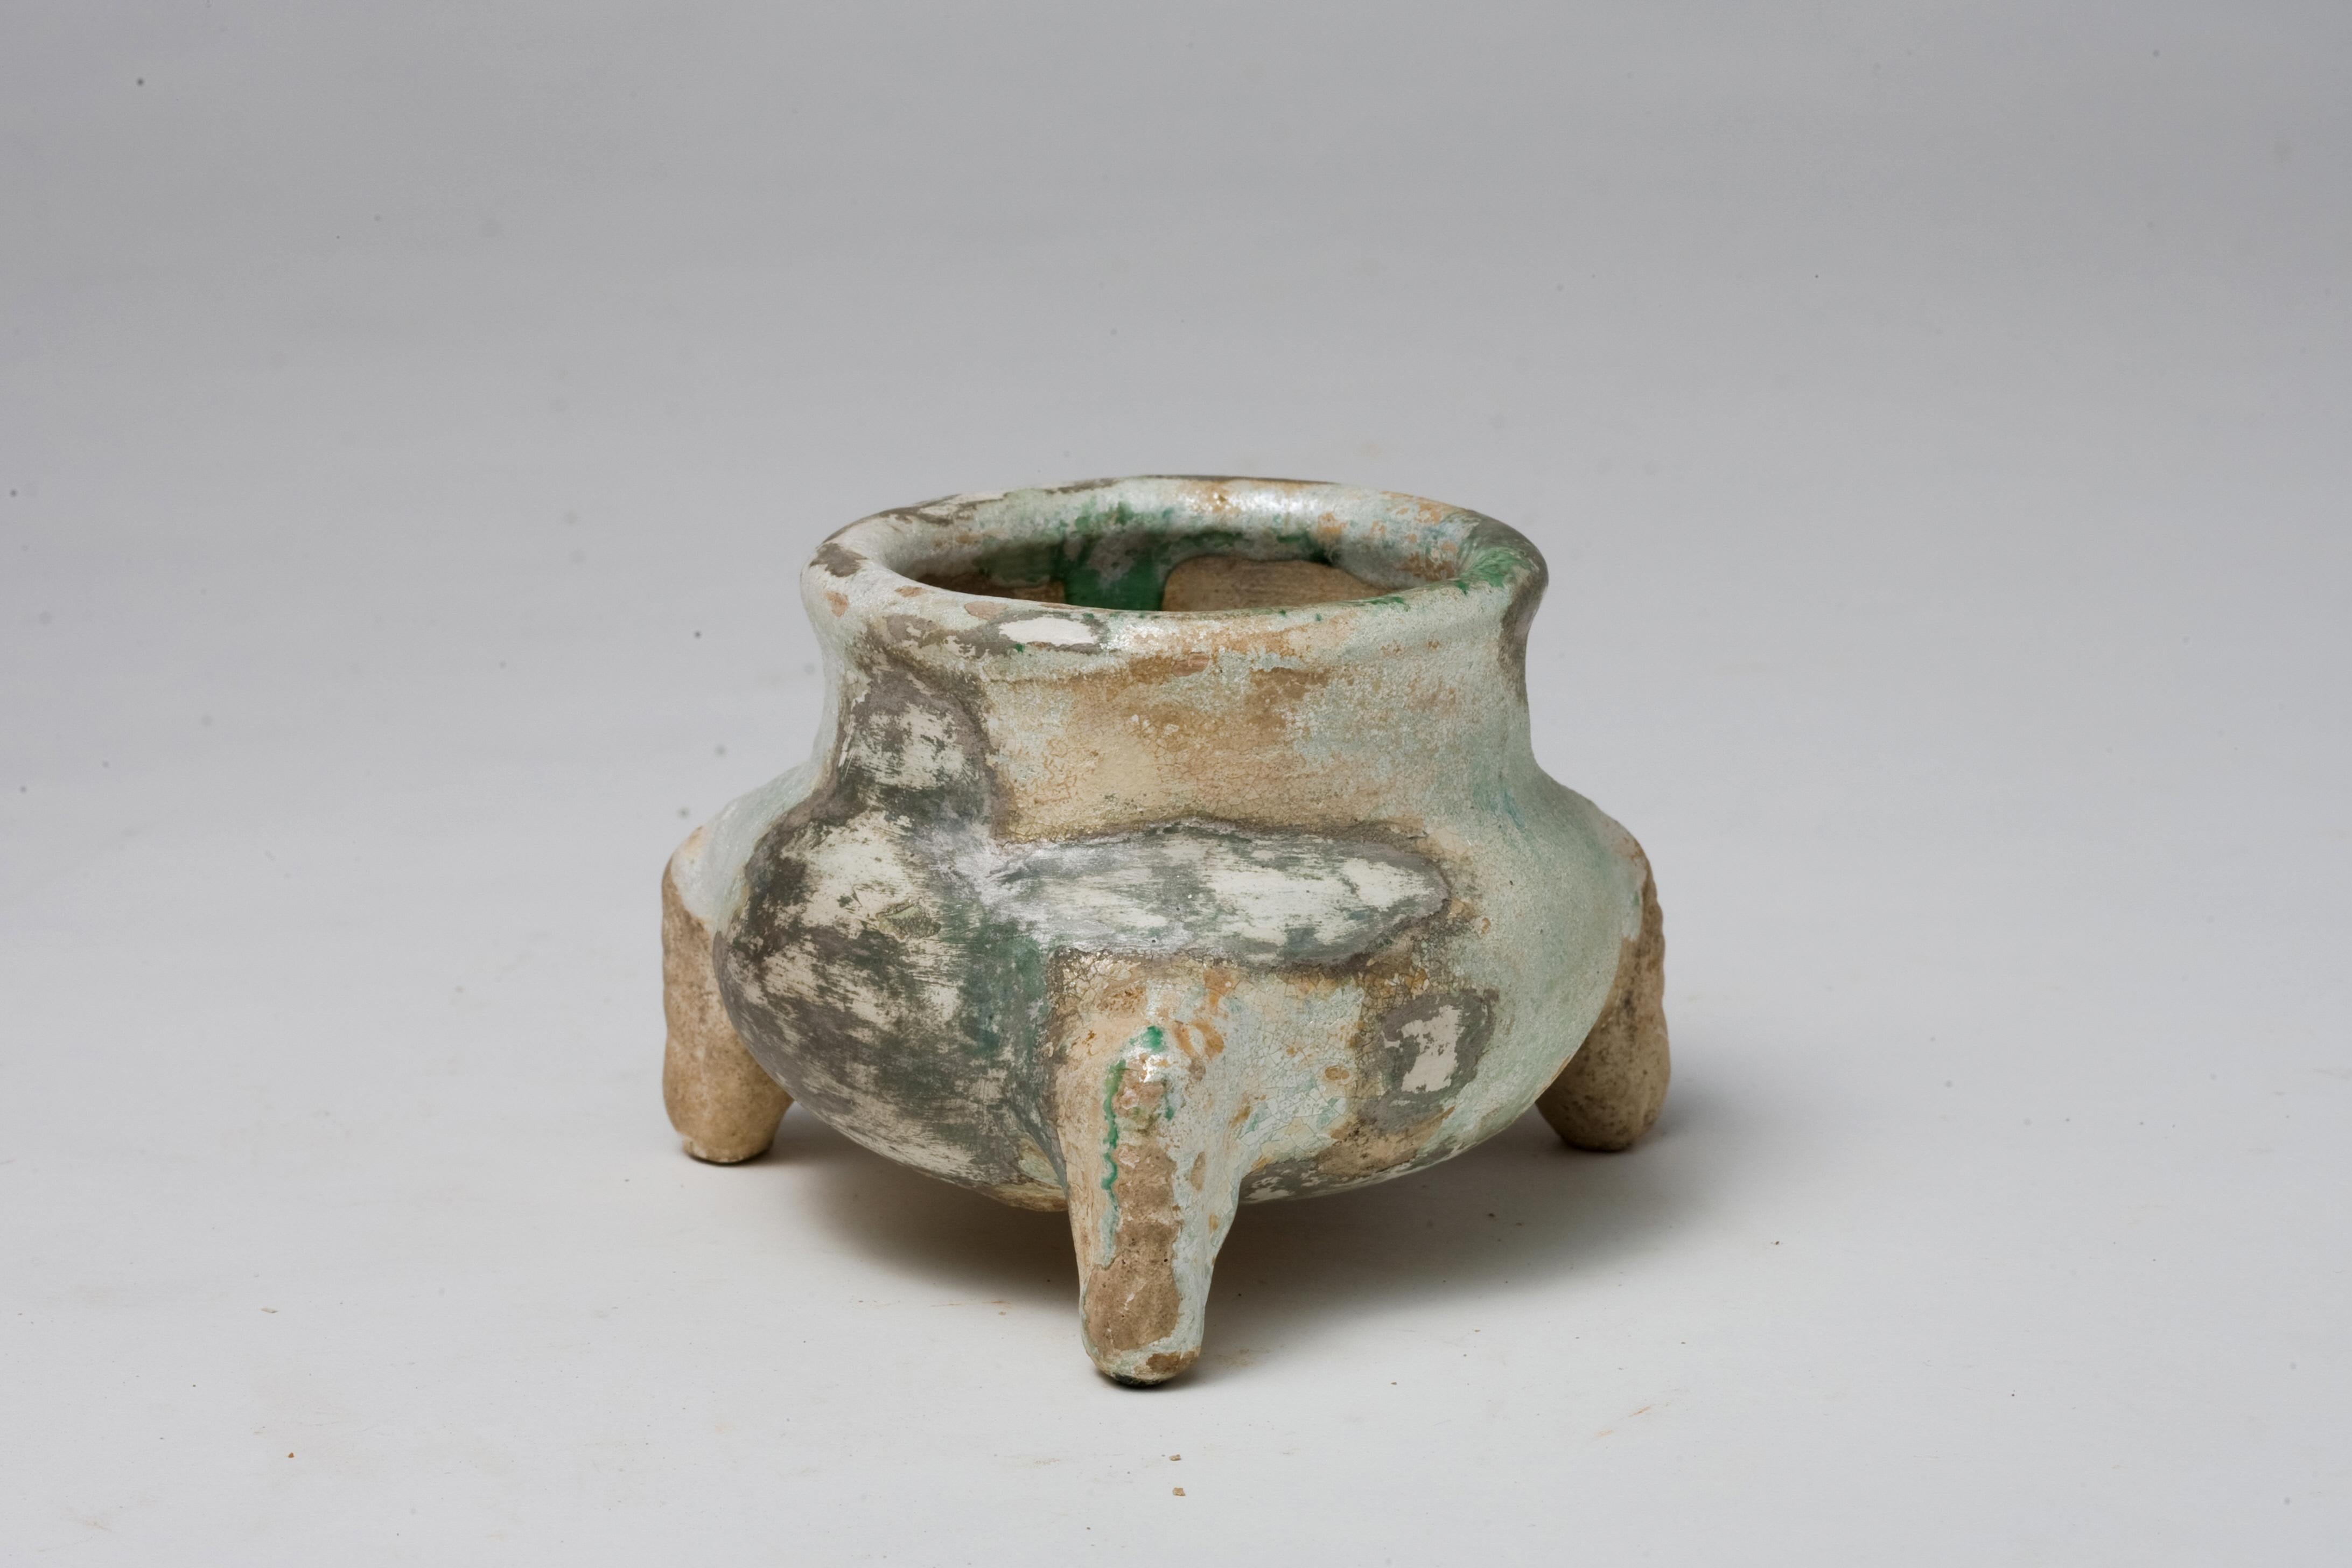 Han Dynasty green-glazed tripods are comparatively rare, especially ones that have retained their structural integrity and glaze over millennia. Pieces in good condition are scarce because they have often been buried with the deceased as part of